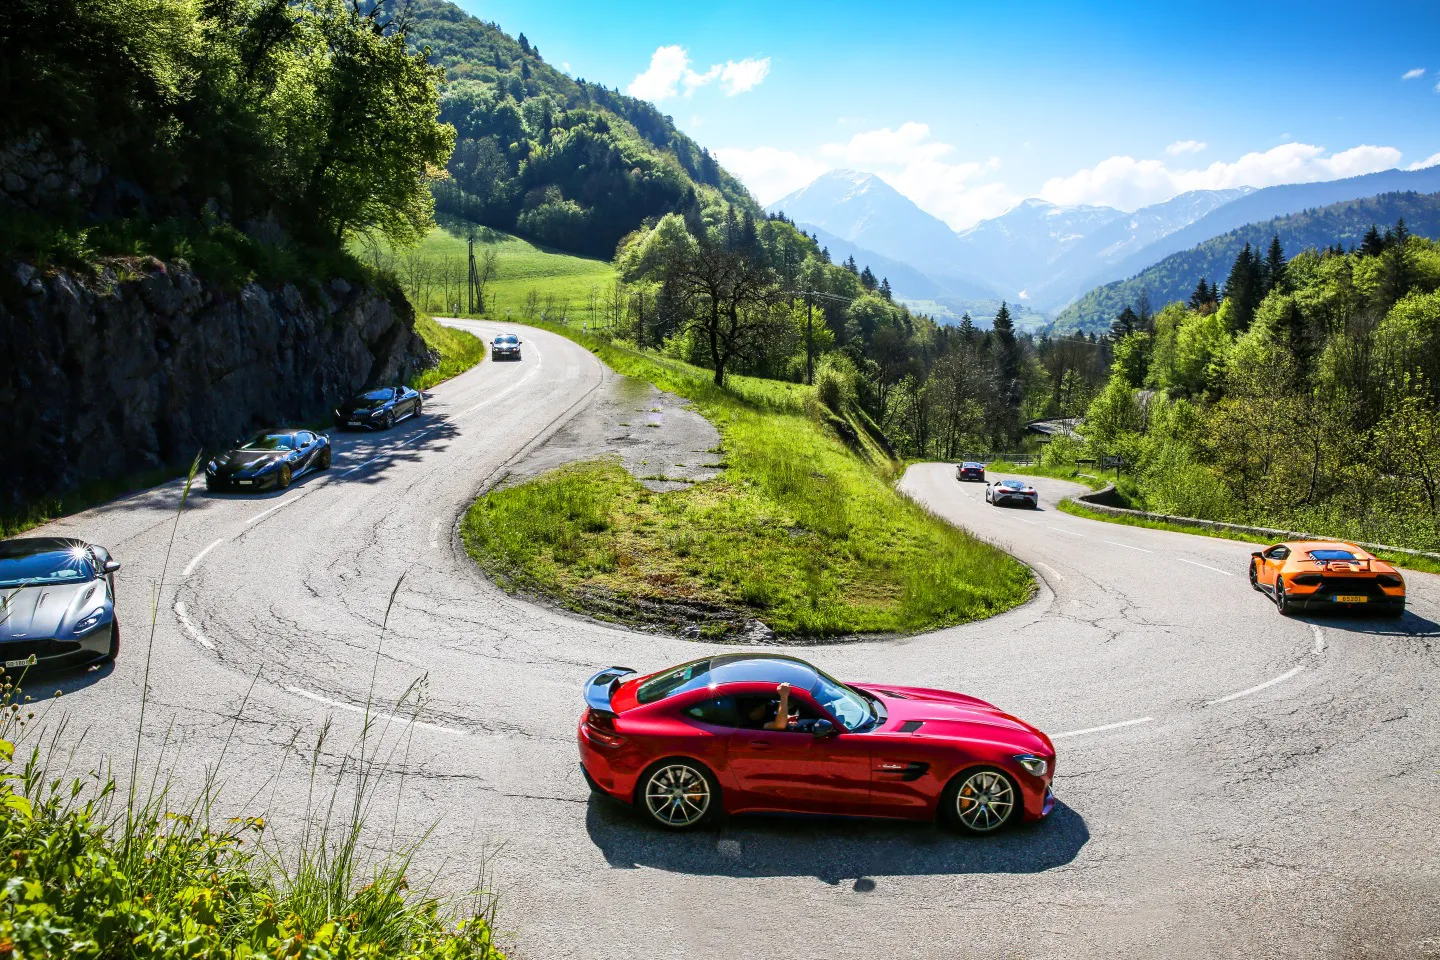 Convoy of supercars driving alpine roads in Europe on a luxury driving tour